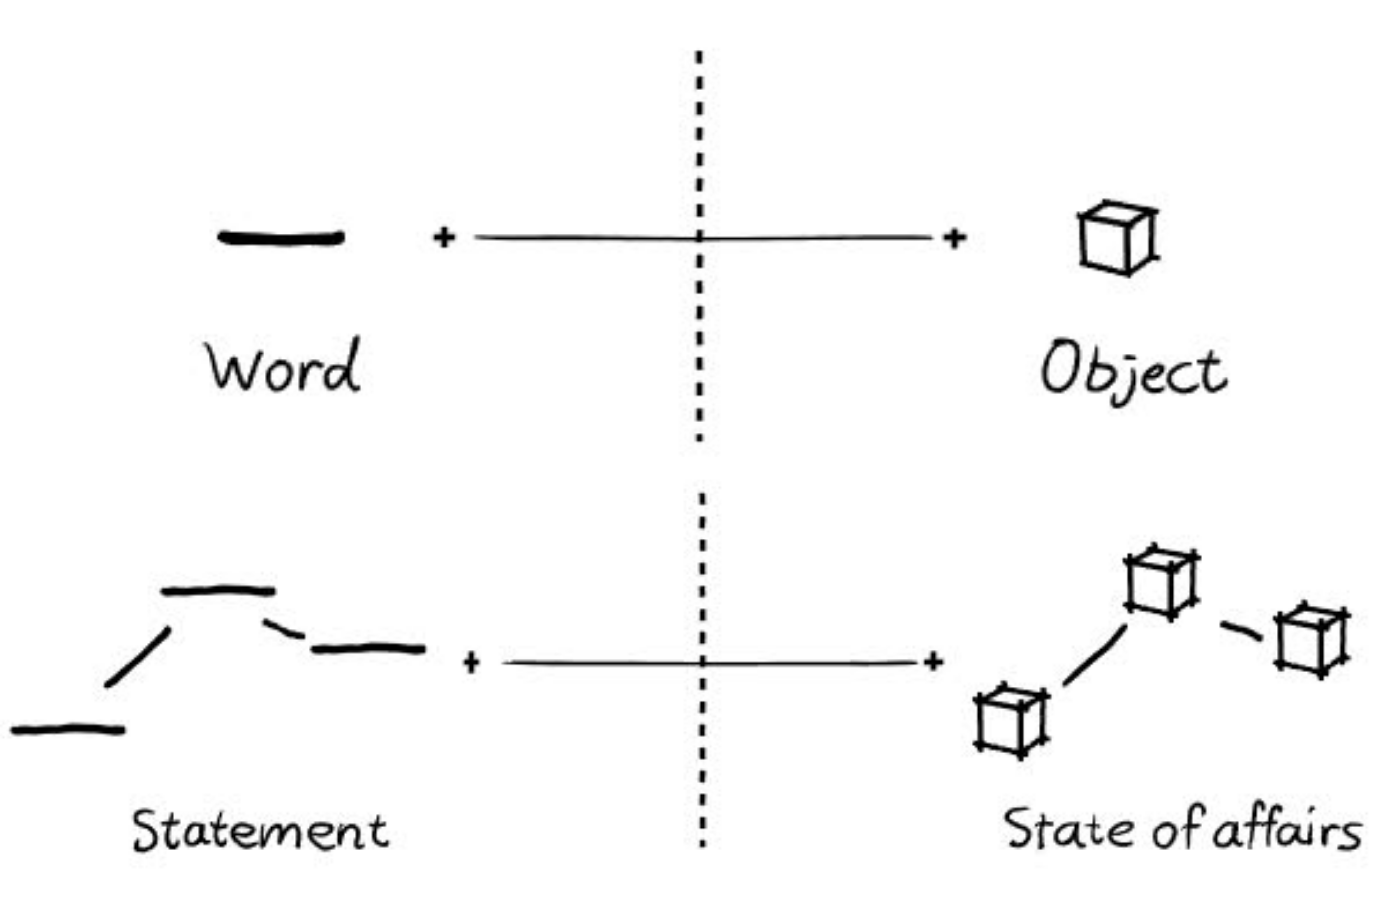 A graphic showing that a "word" equals an "object.   A "statement" composed of "words" equals a "state of affairs" composed of "objects".